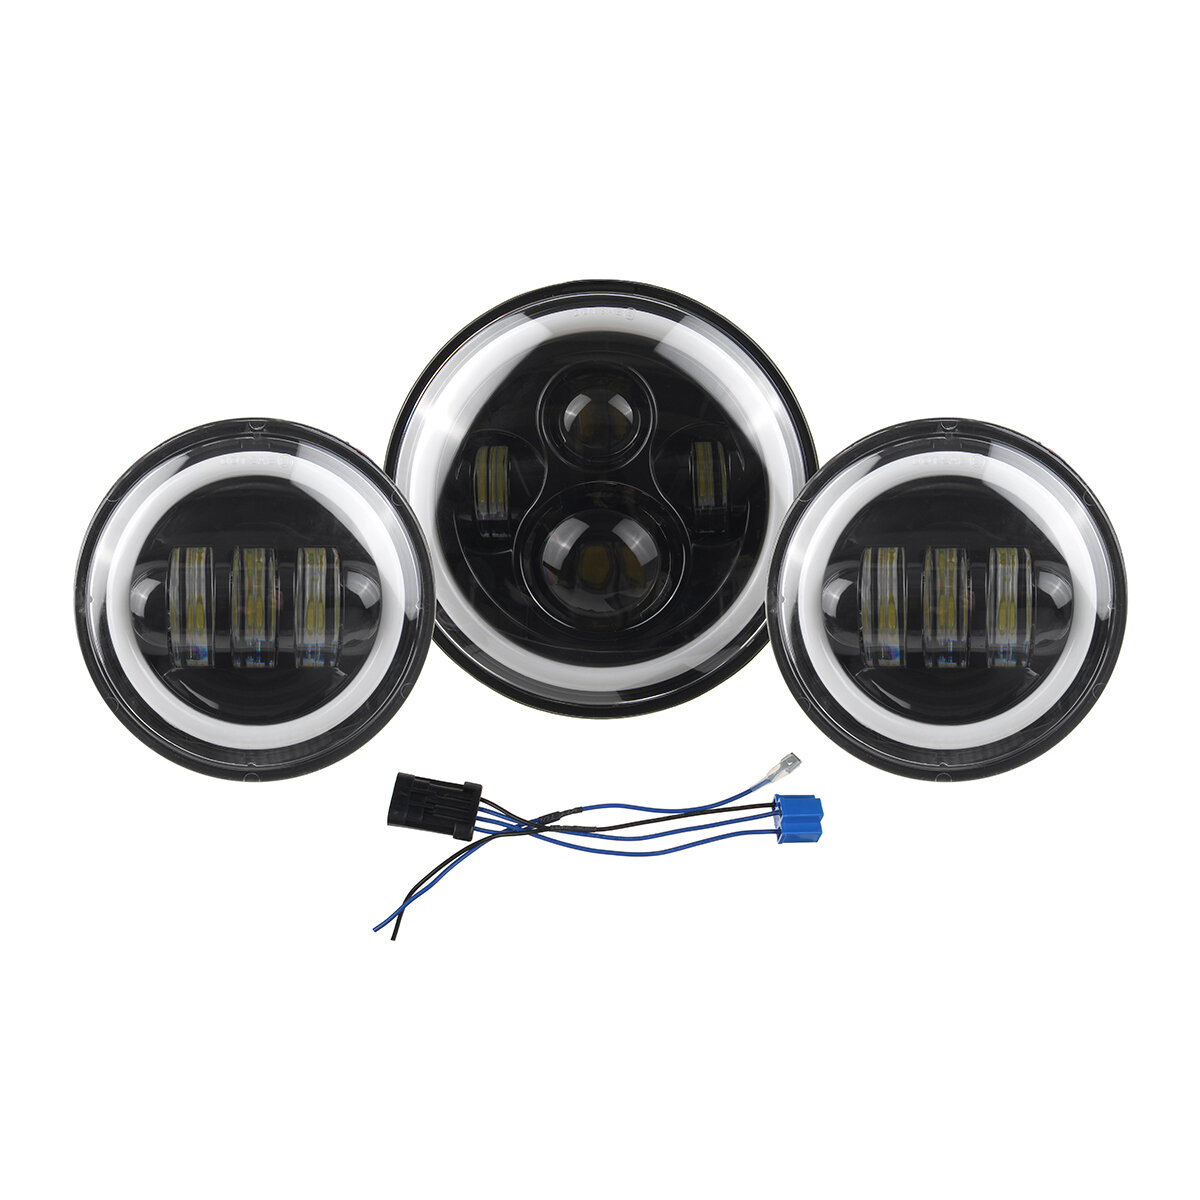 Image of 7" LED Projector Headlight + 45" Halo Ring Amber Turn Signal Headlamp Fit For Motorcycle Travel